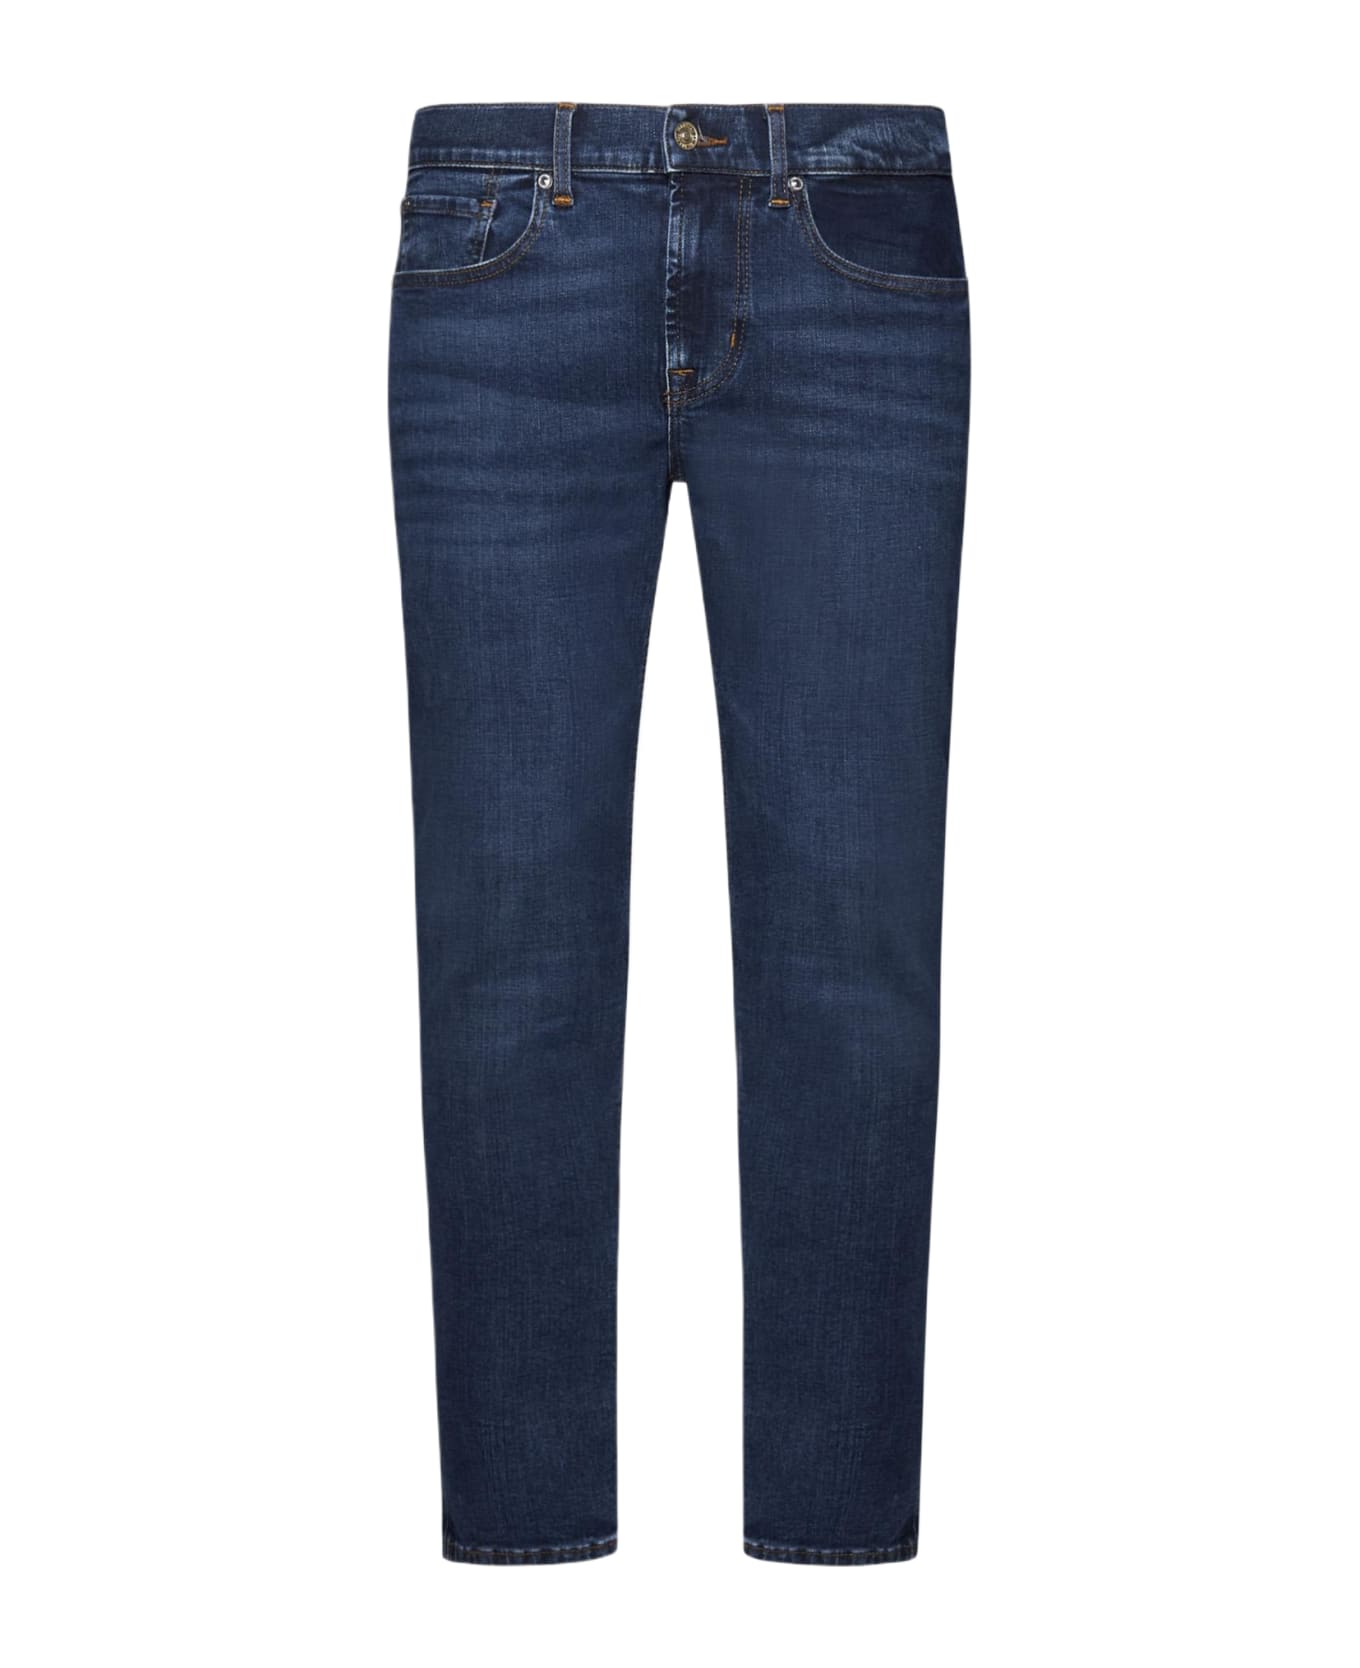 7 For All Mankind Slimmy Tapered Jeans - DENIM BLUE デニム